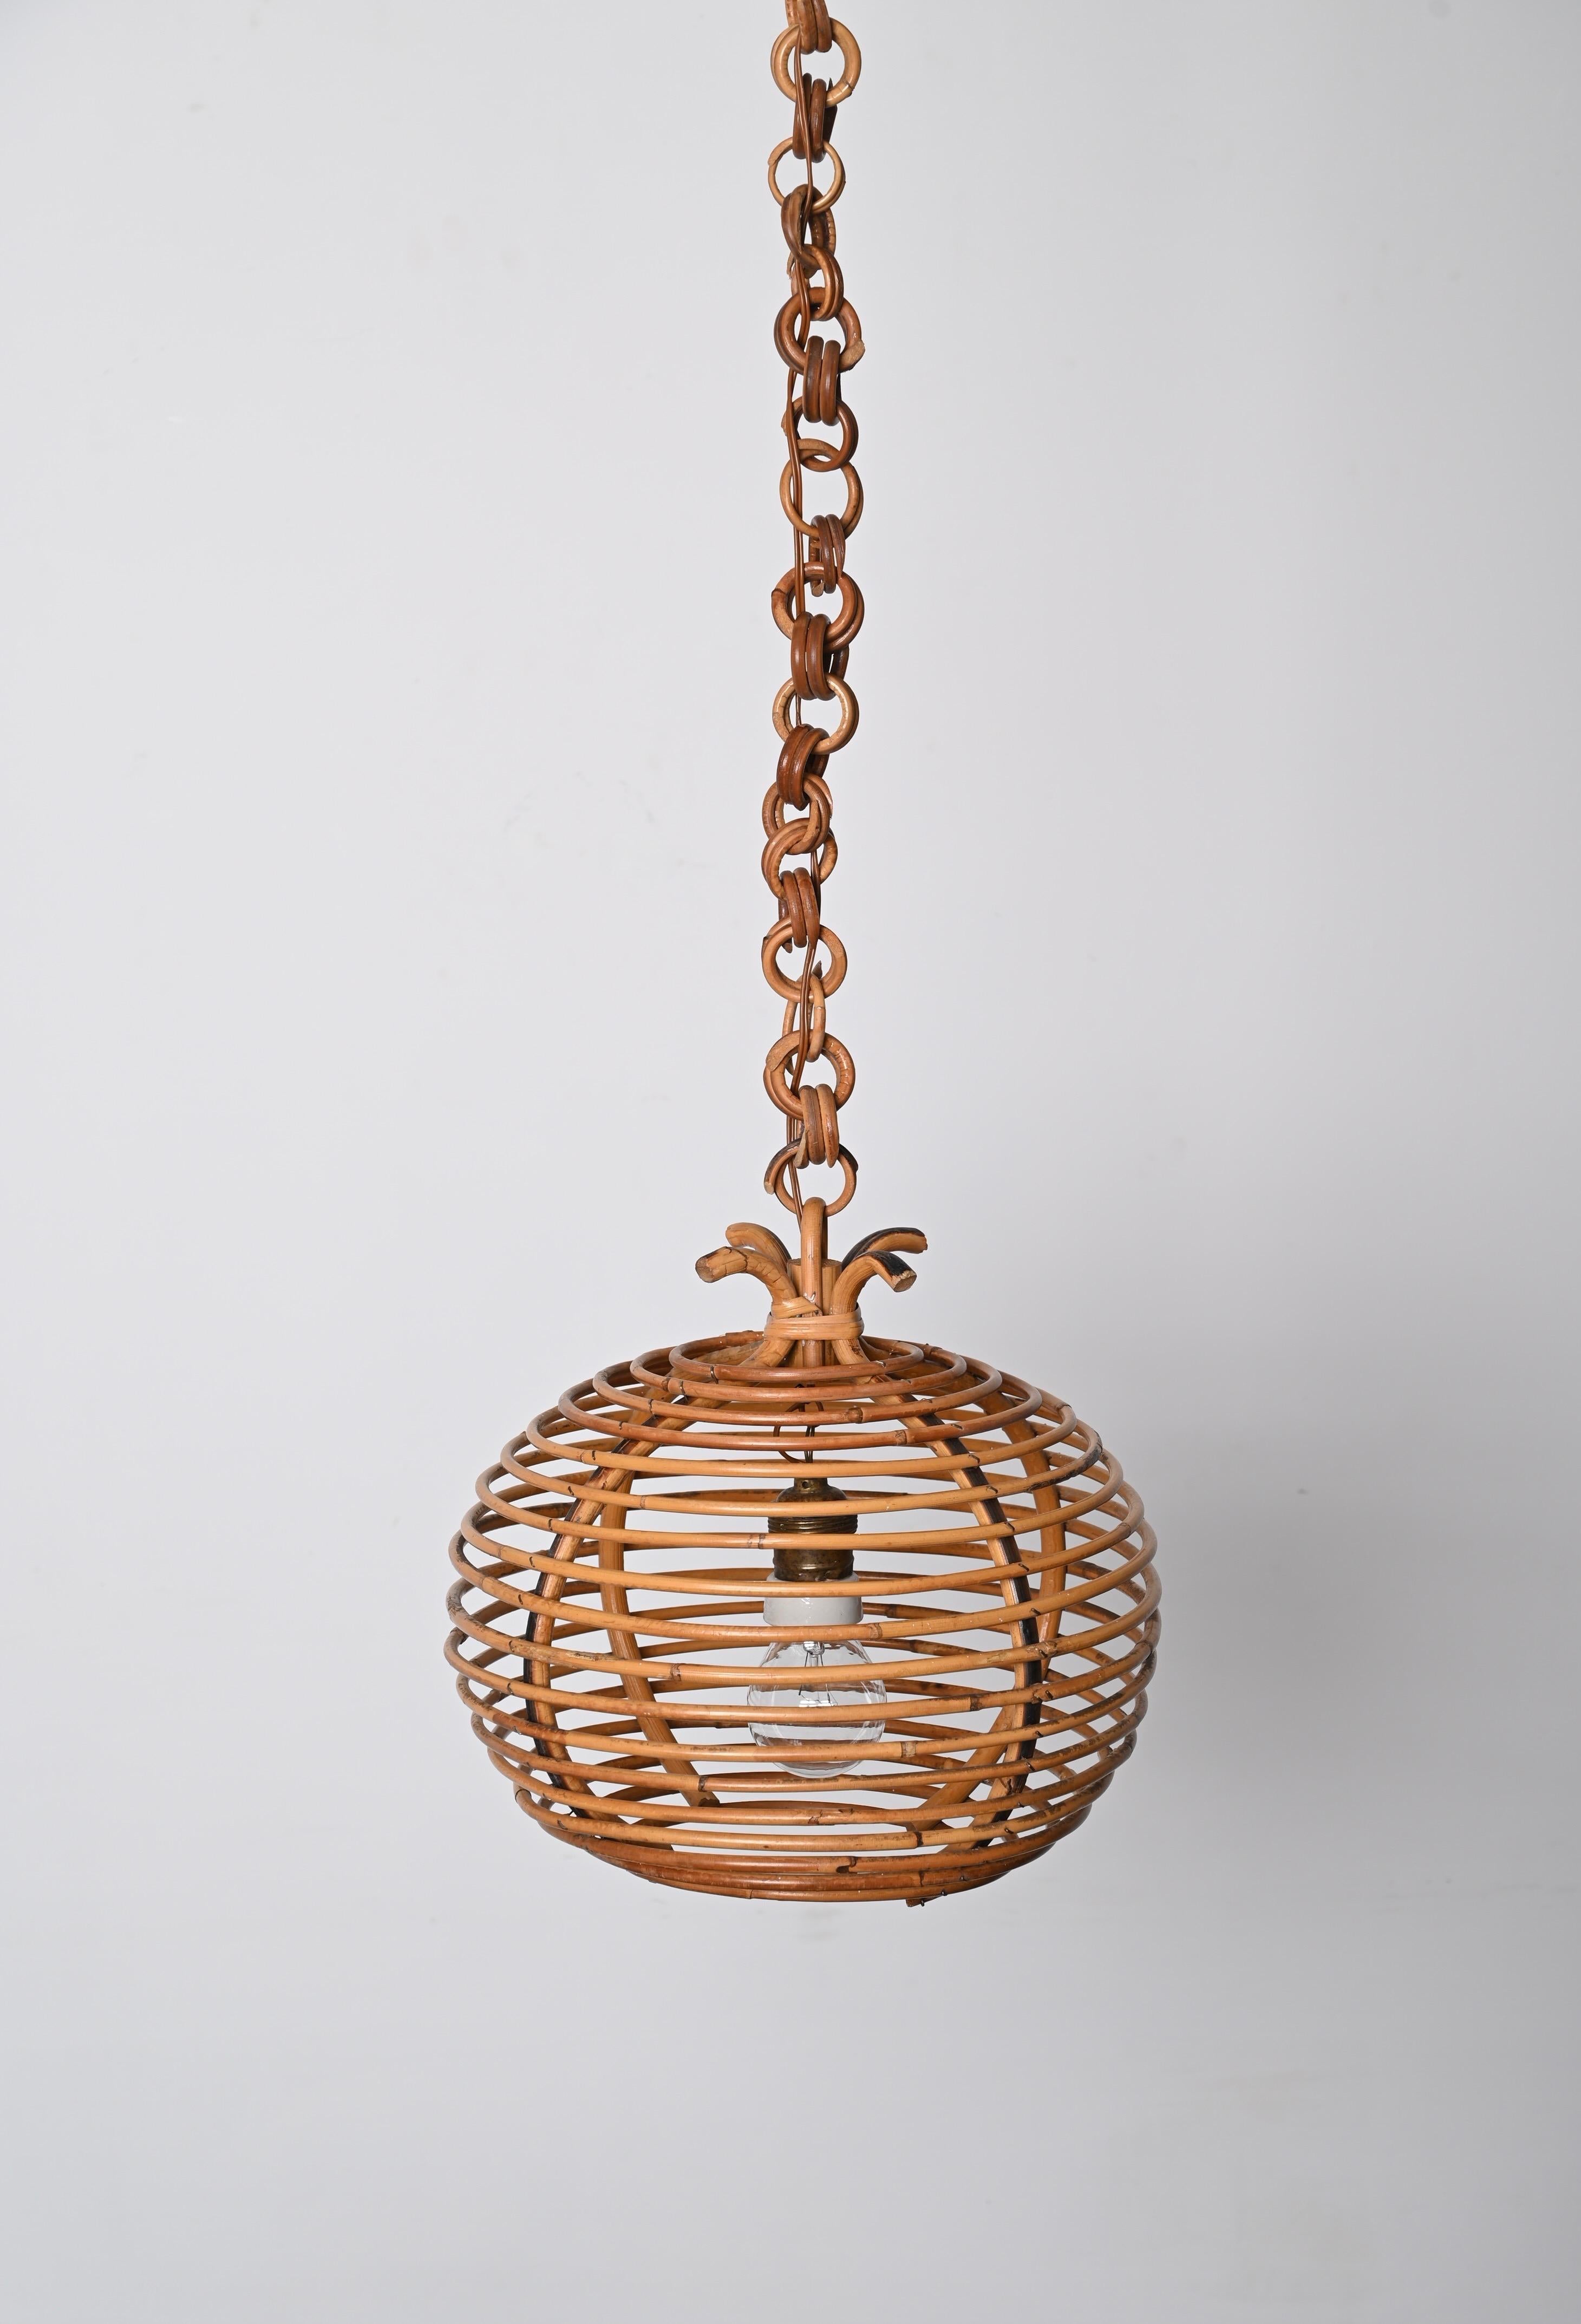 Midcentury French Riviera Bambo and Rattan Spherical Italian Chandelier, 1960s For Sale 7